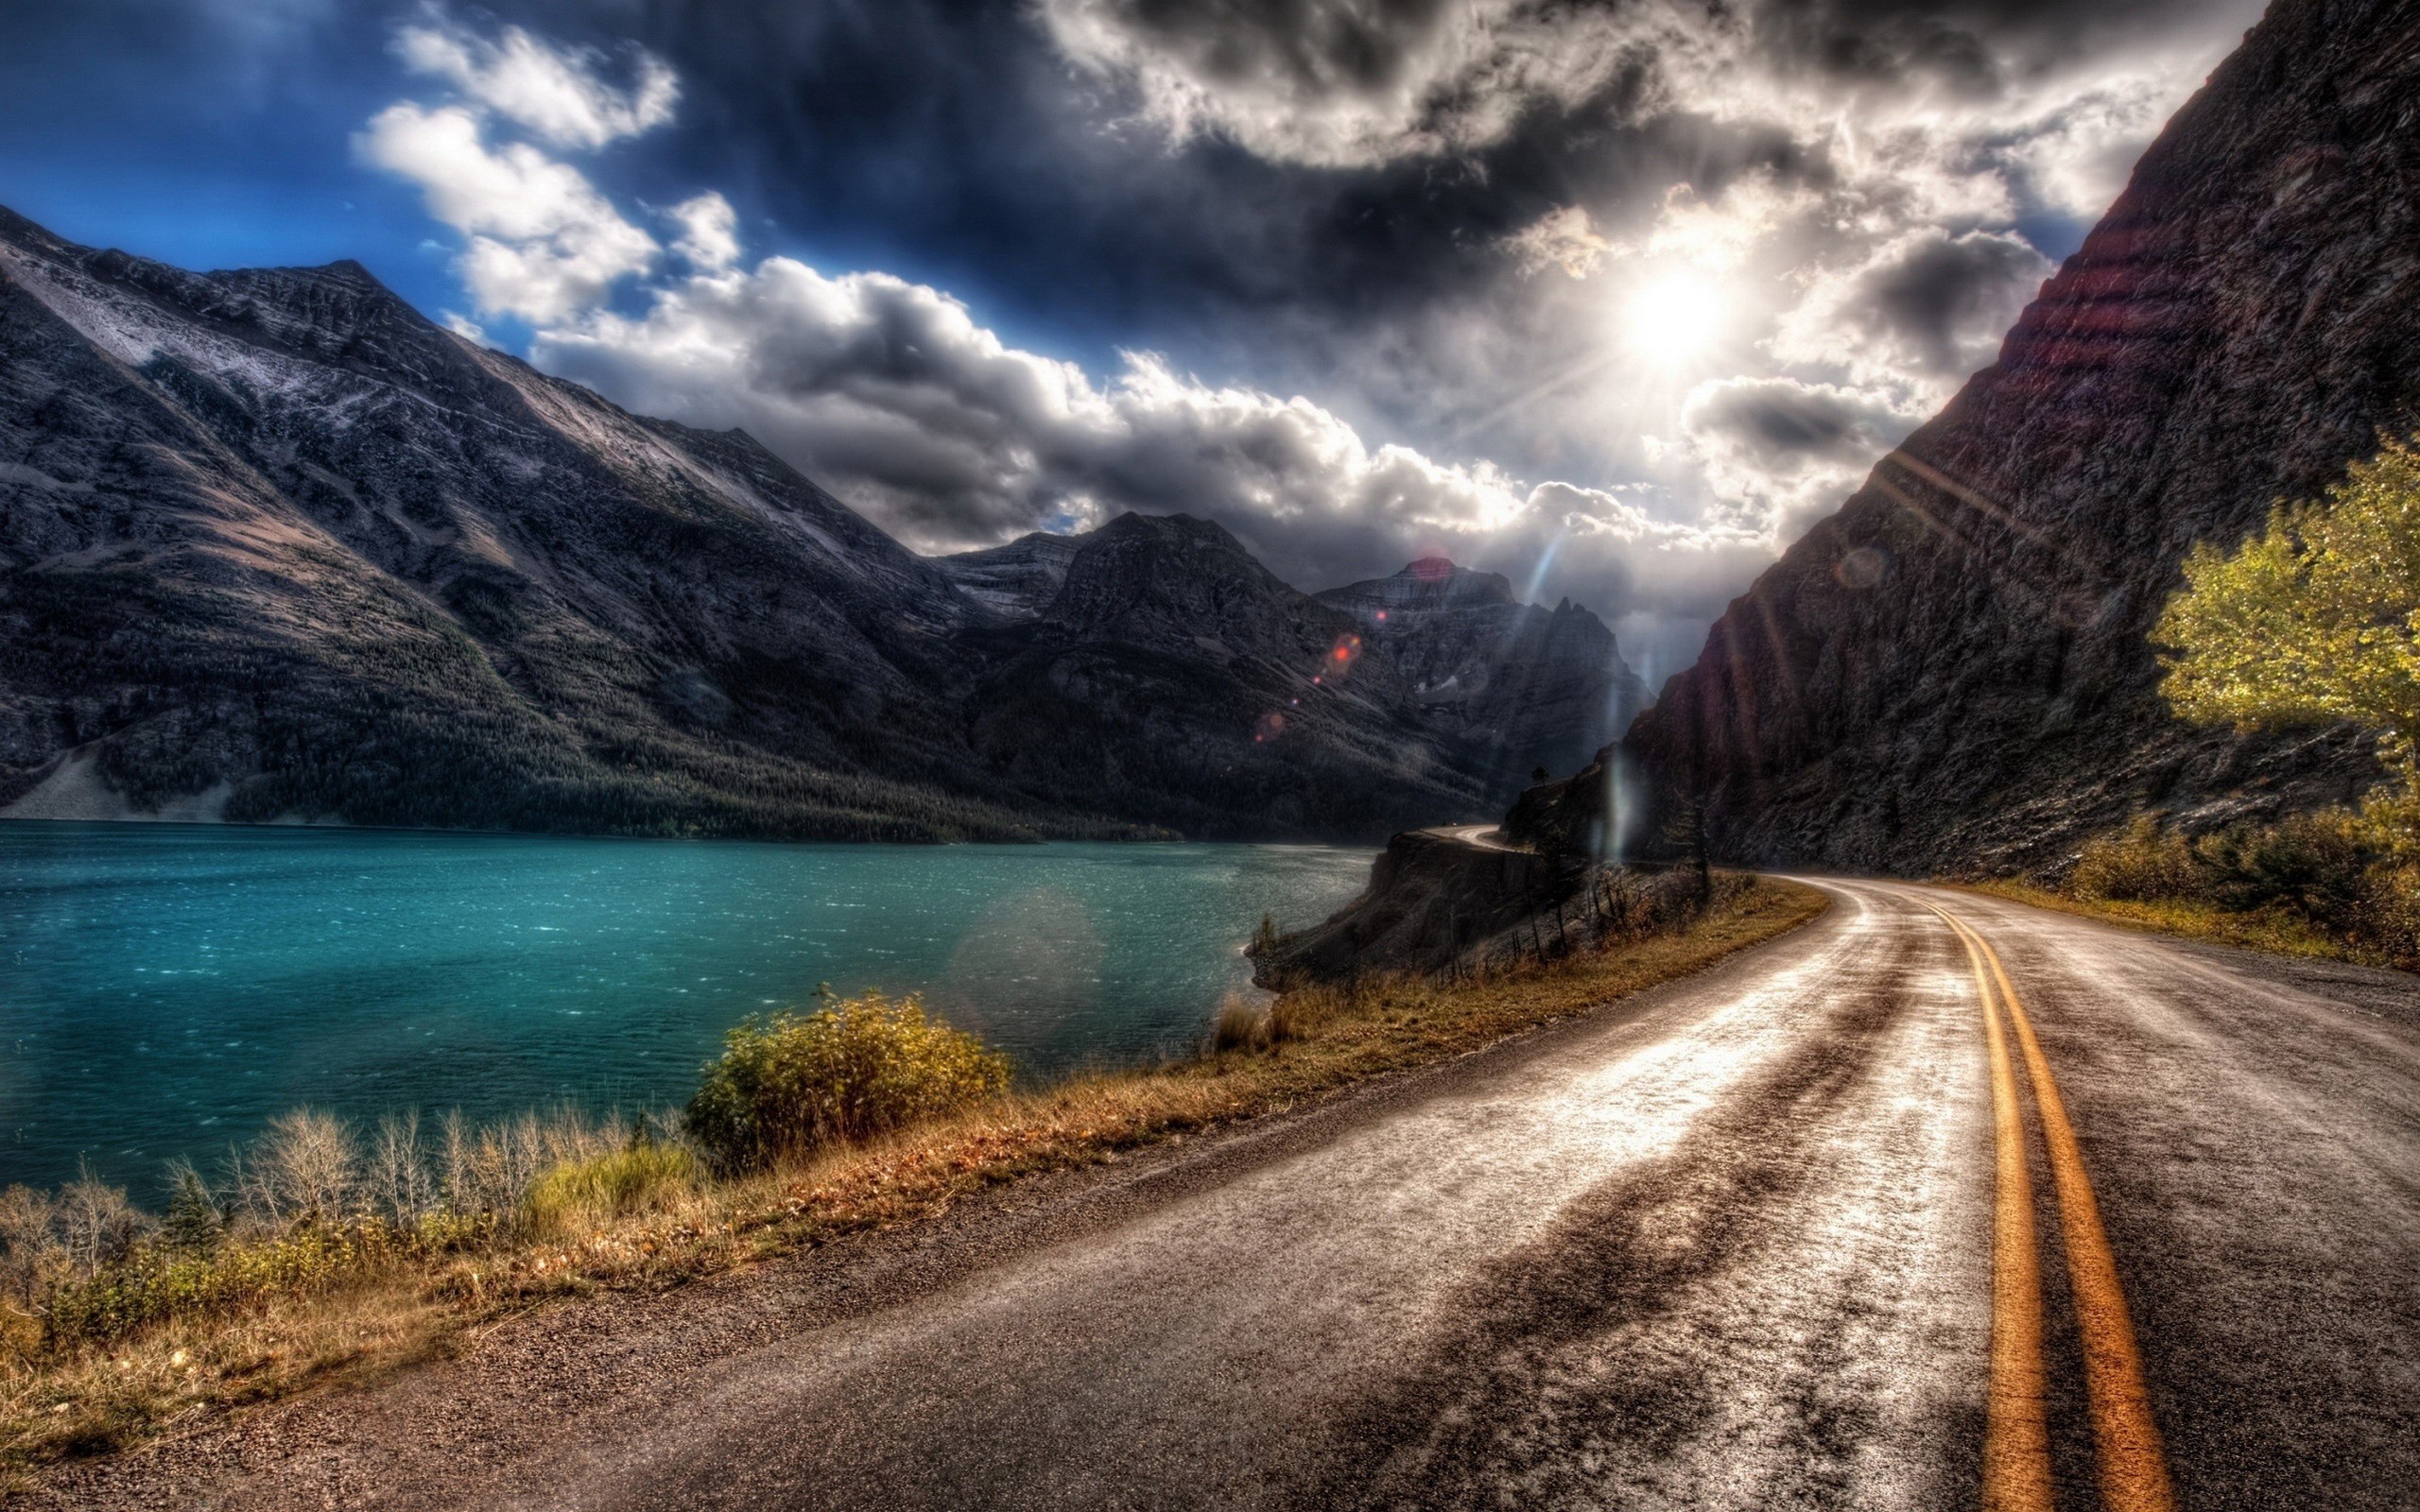 General 2560x1600 nature landscape road lake sky mountains HDR